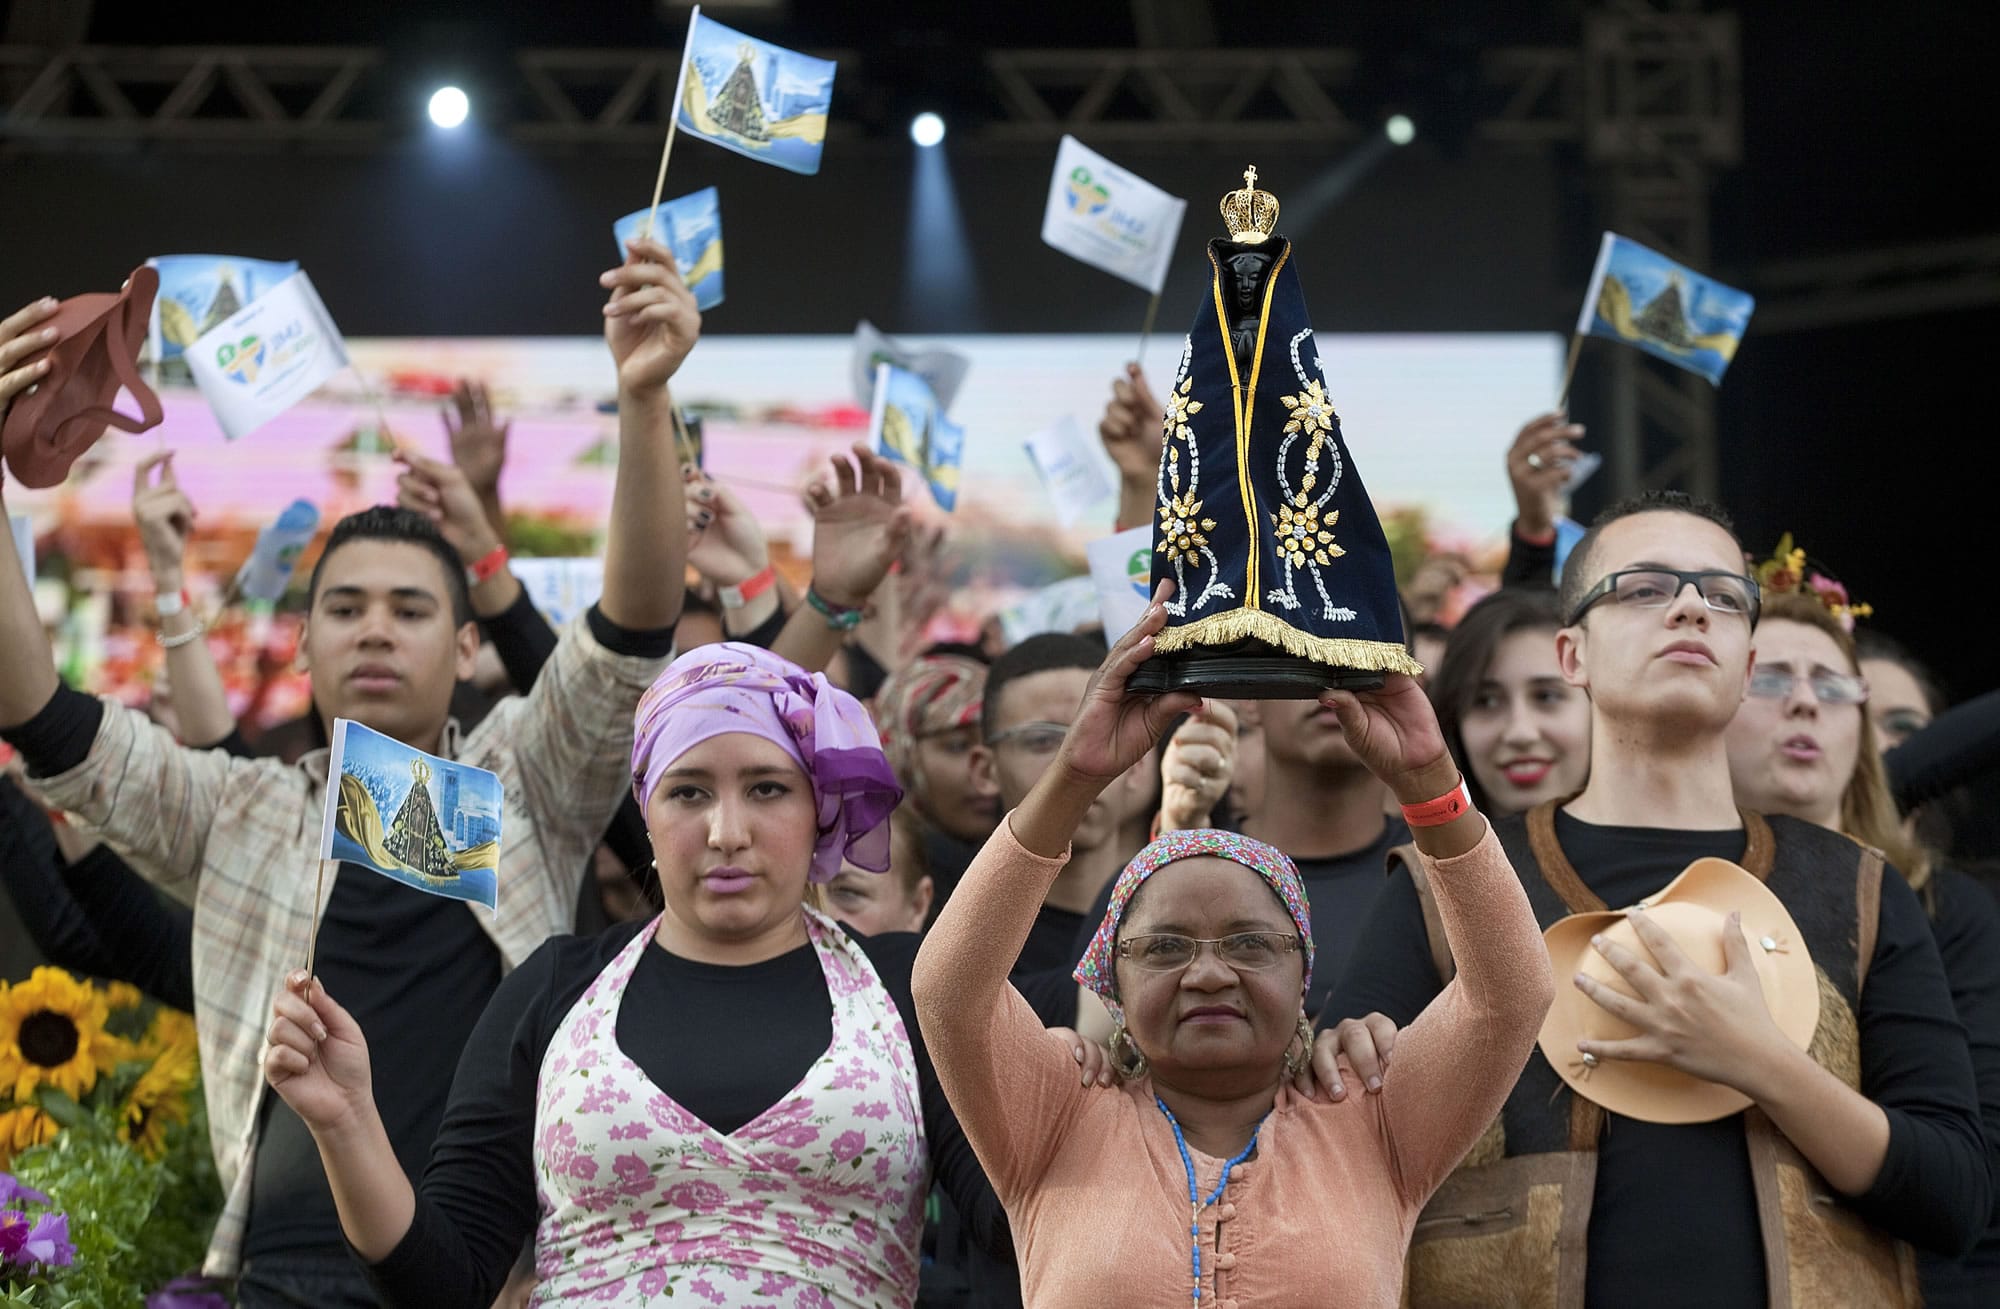 A woman holds up a replica of the statue of the Virgin of Aparecida as others wave flags with her image at a Mass ahead of World Youth Day in Sao Paulo, Brazil.